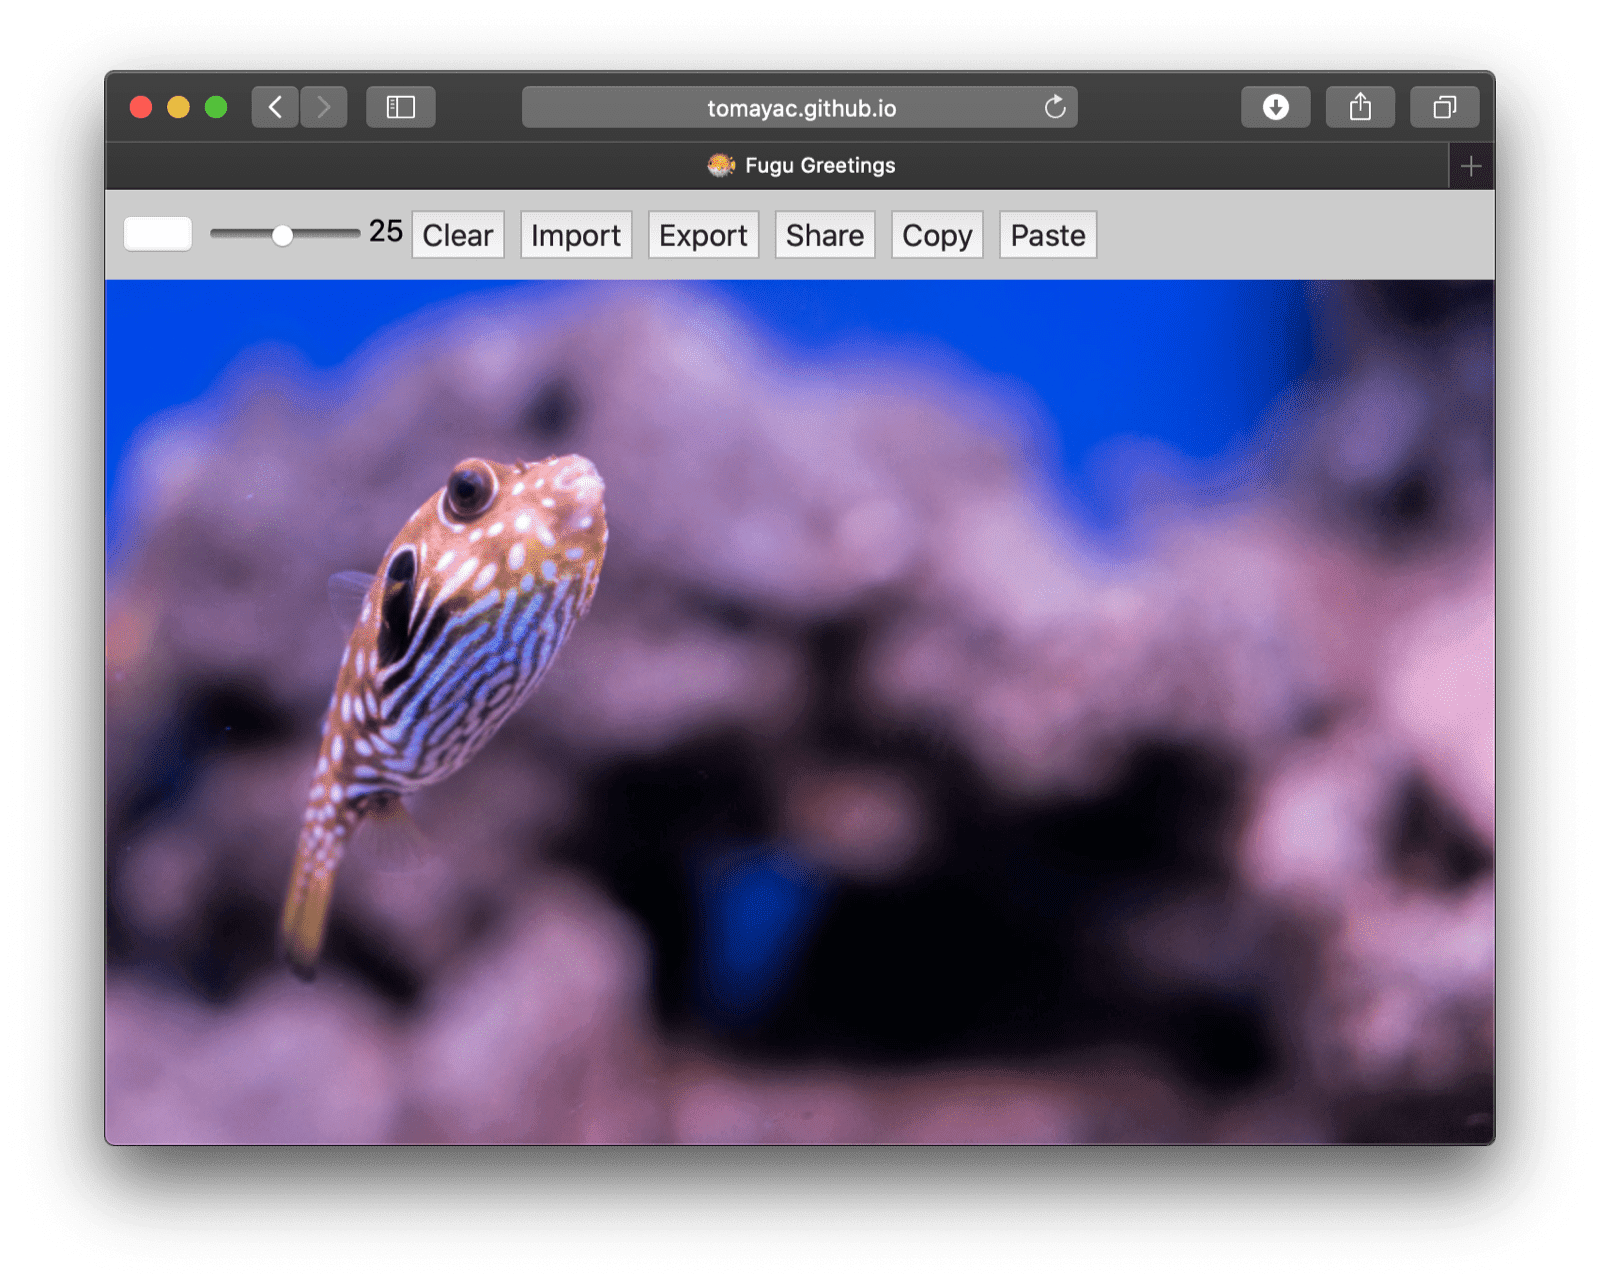 Fugu Greetings running on desktop Safari, showing fewer available features.